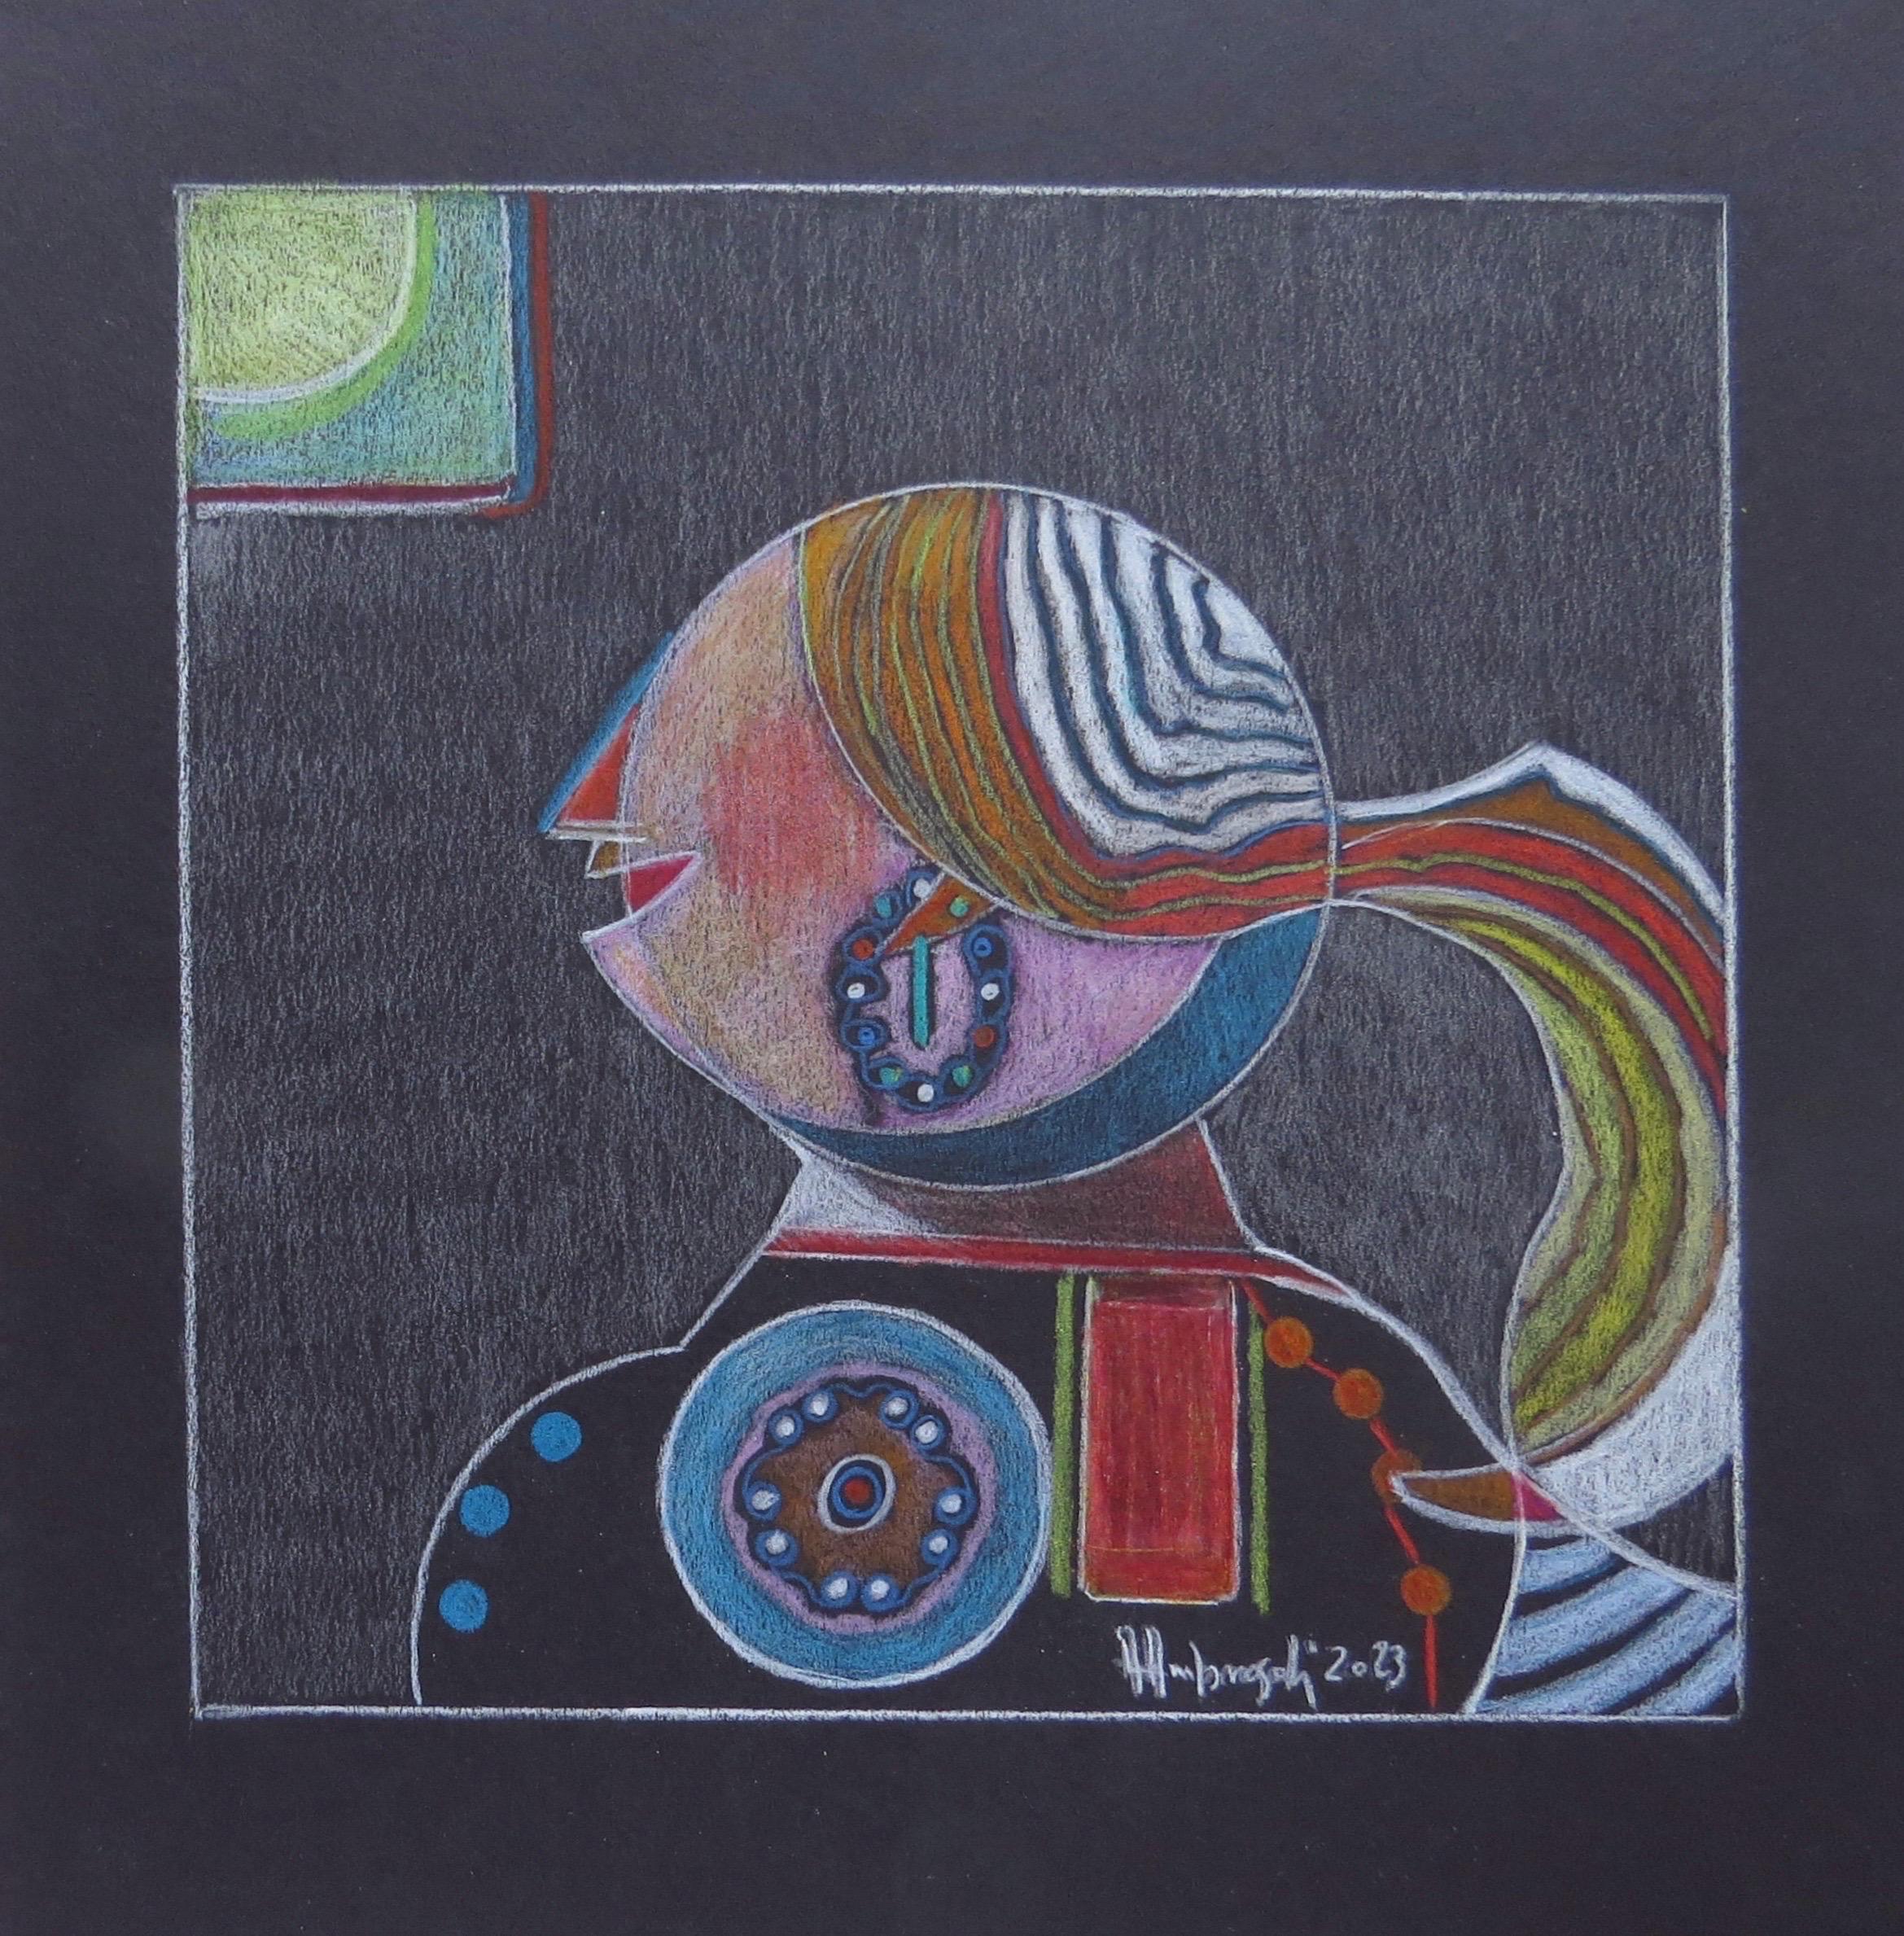 Shining by Annemarie Ambrosoli, color pencil, 21x21cm, Abstract